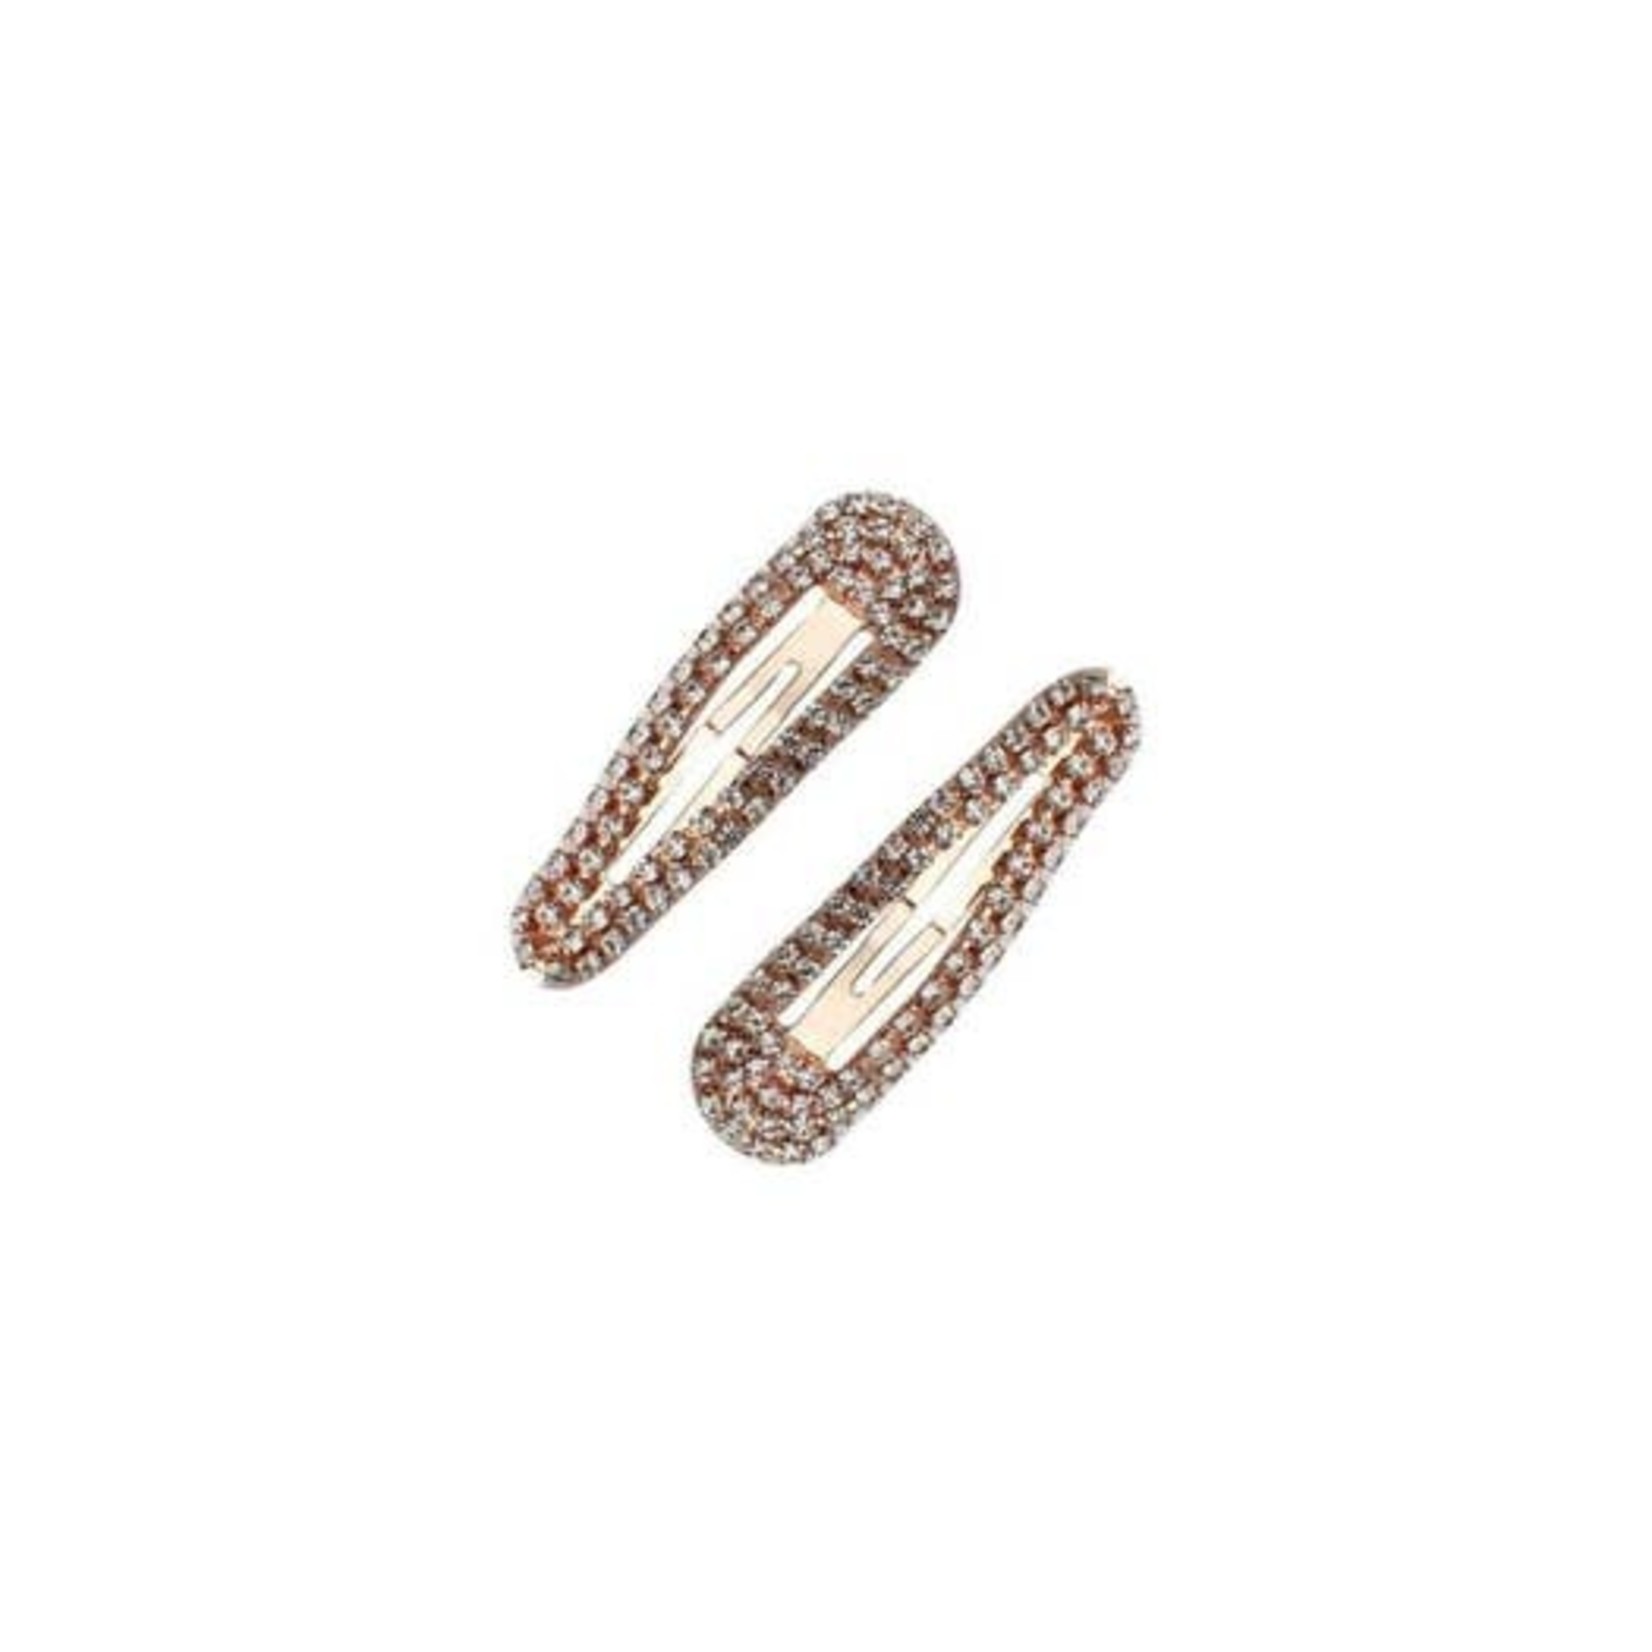 Kitsch Rhinestone Snap Clips in Rose Gold